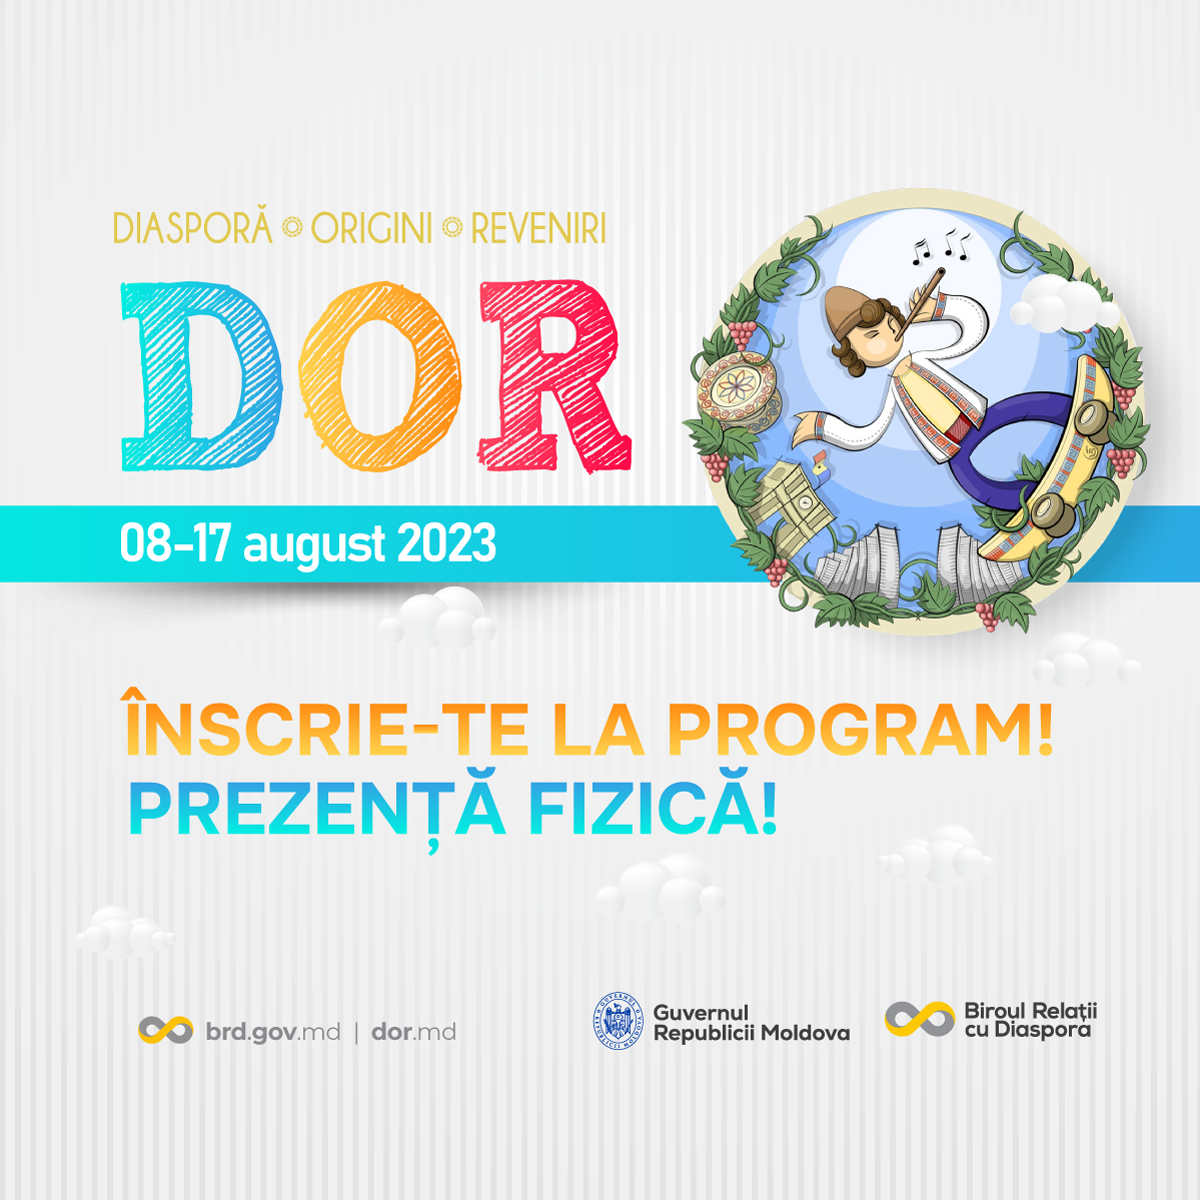 The DOR program returns in a new edition